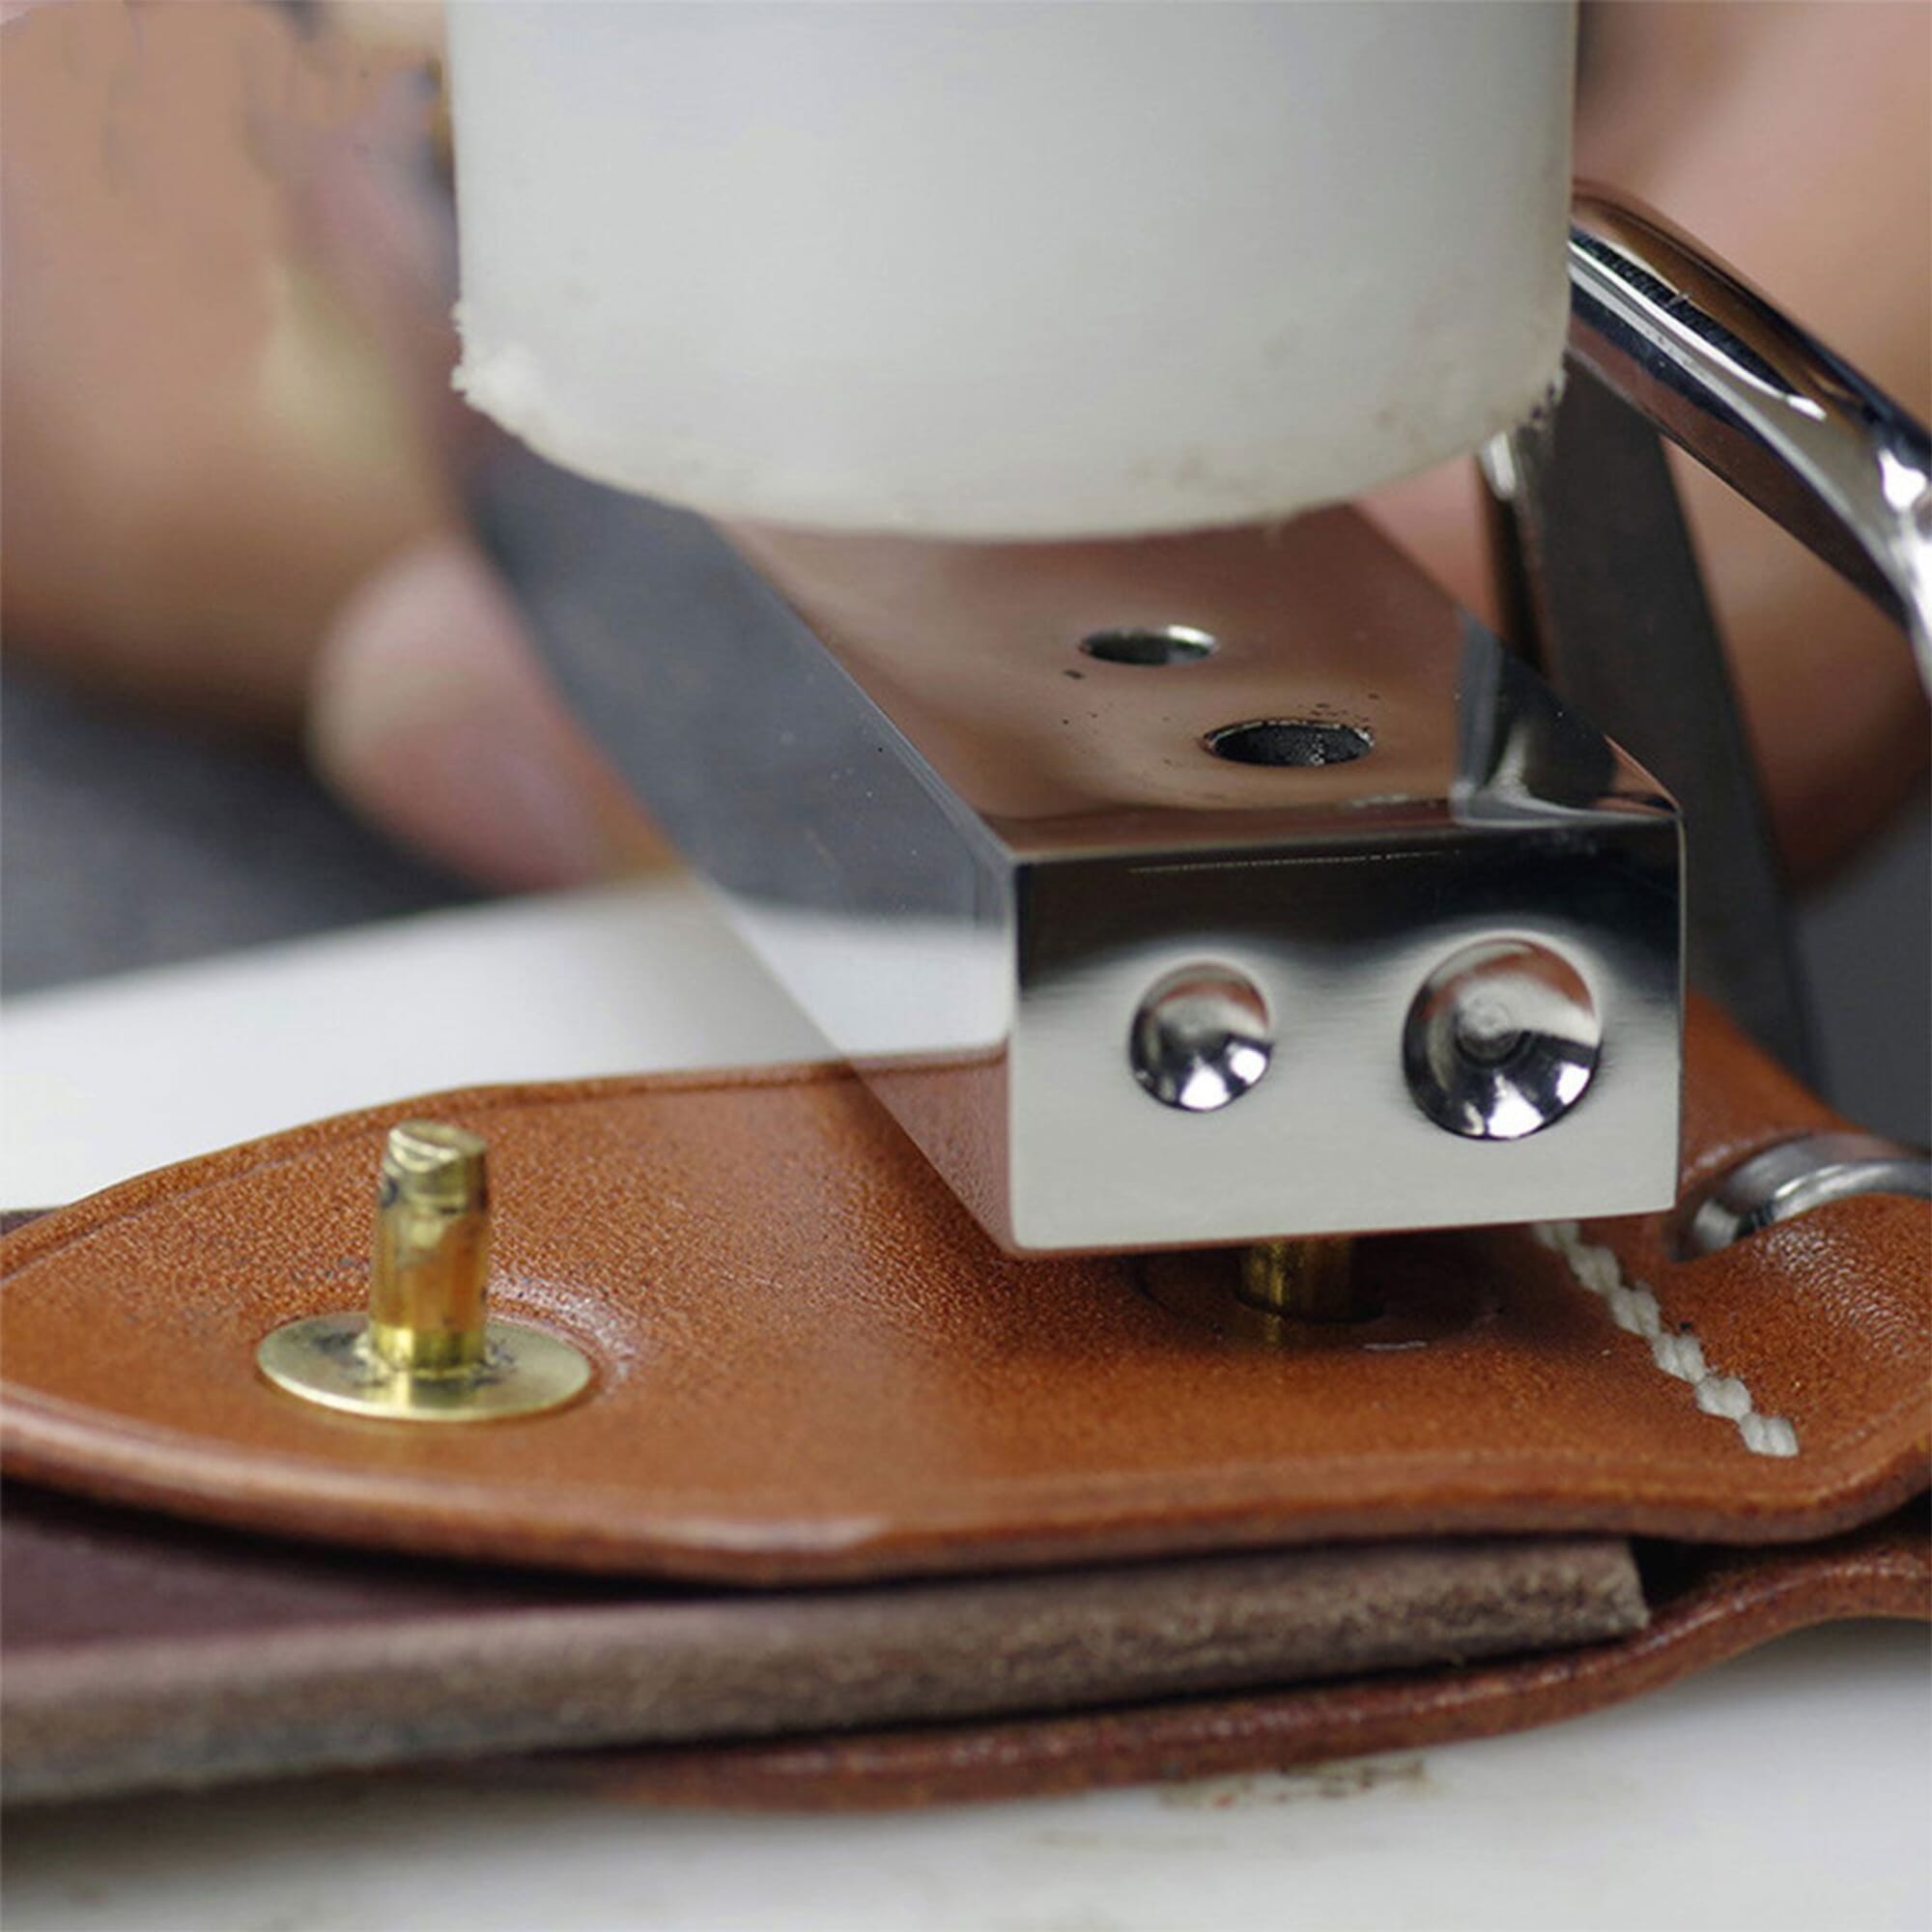 How to Rivet Leather - Step by Step Guide to Setting Rivets